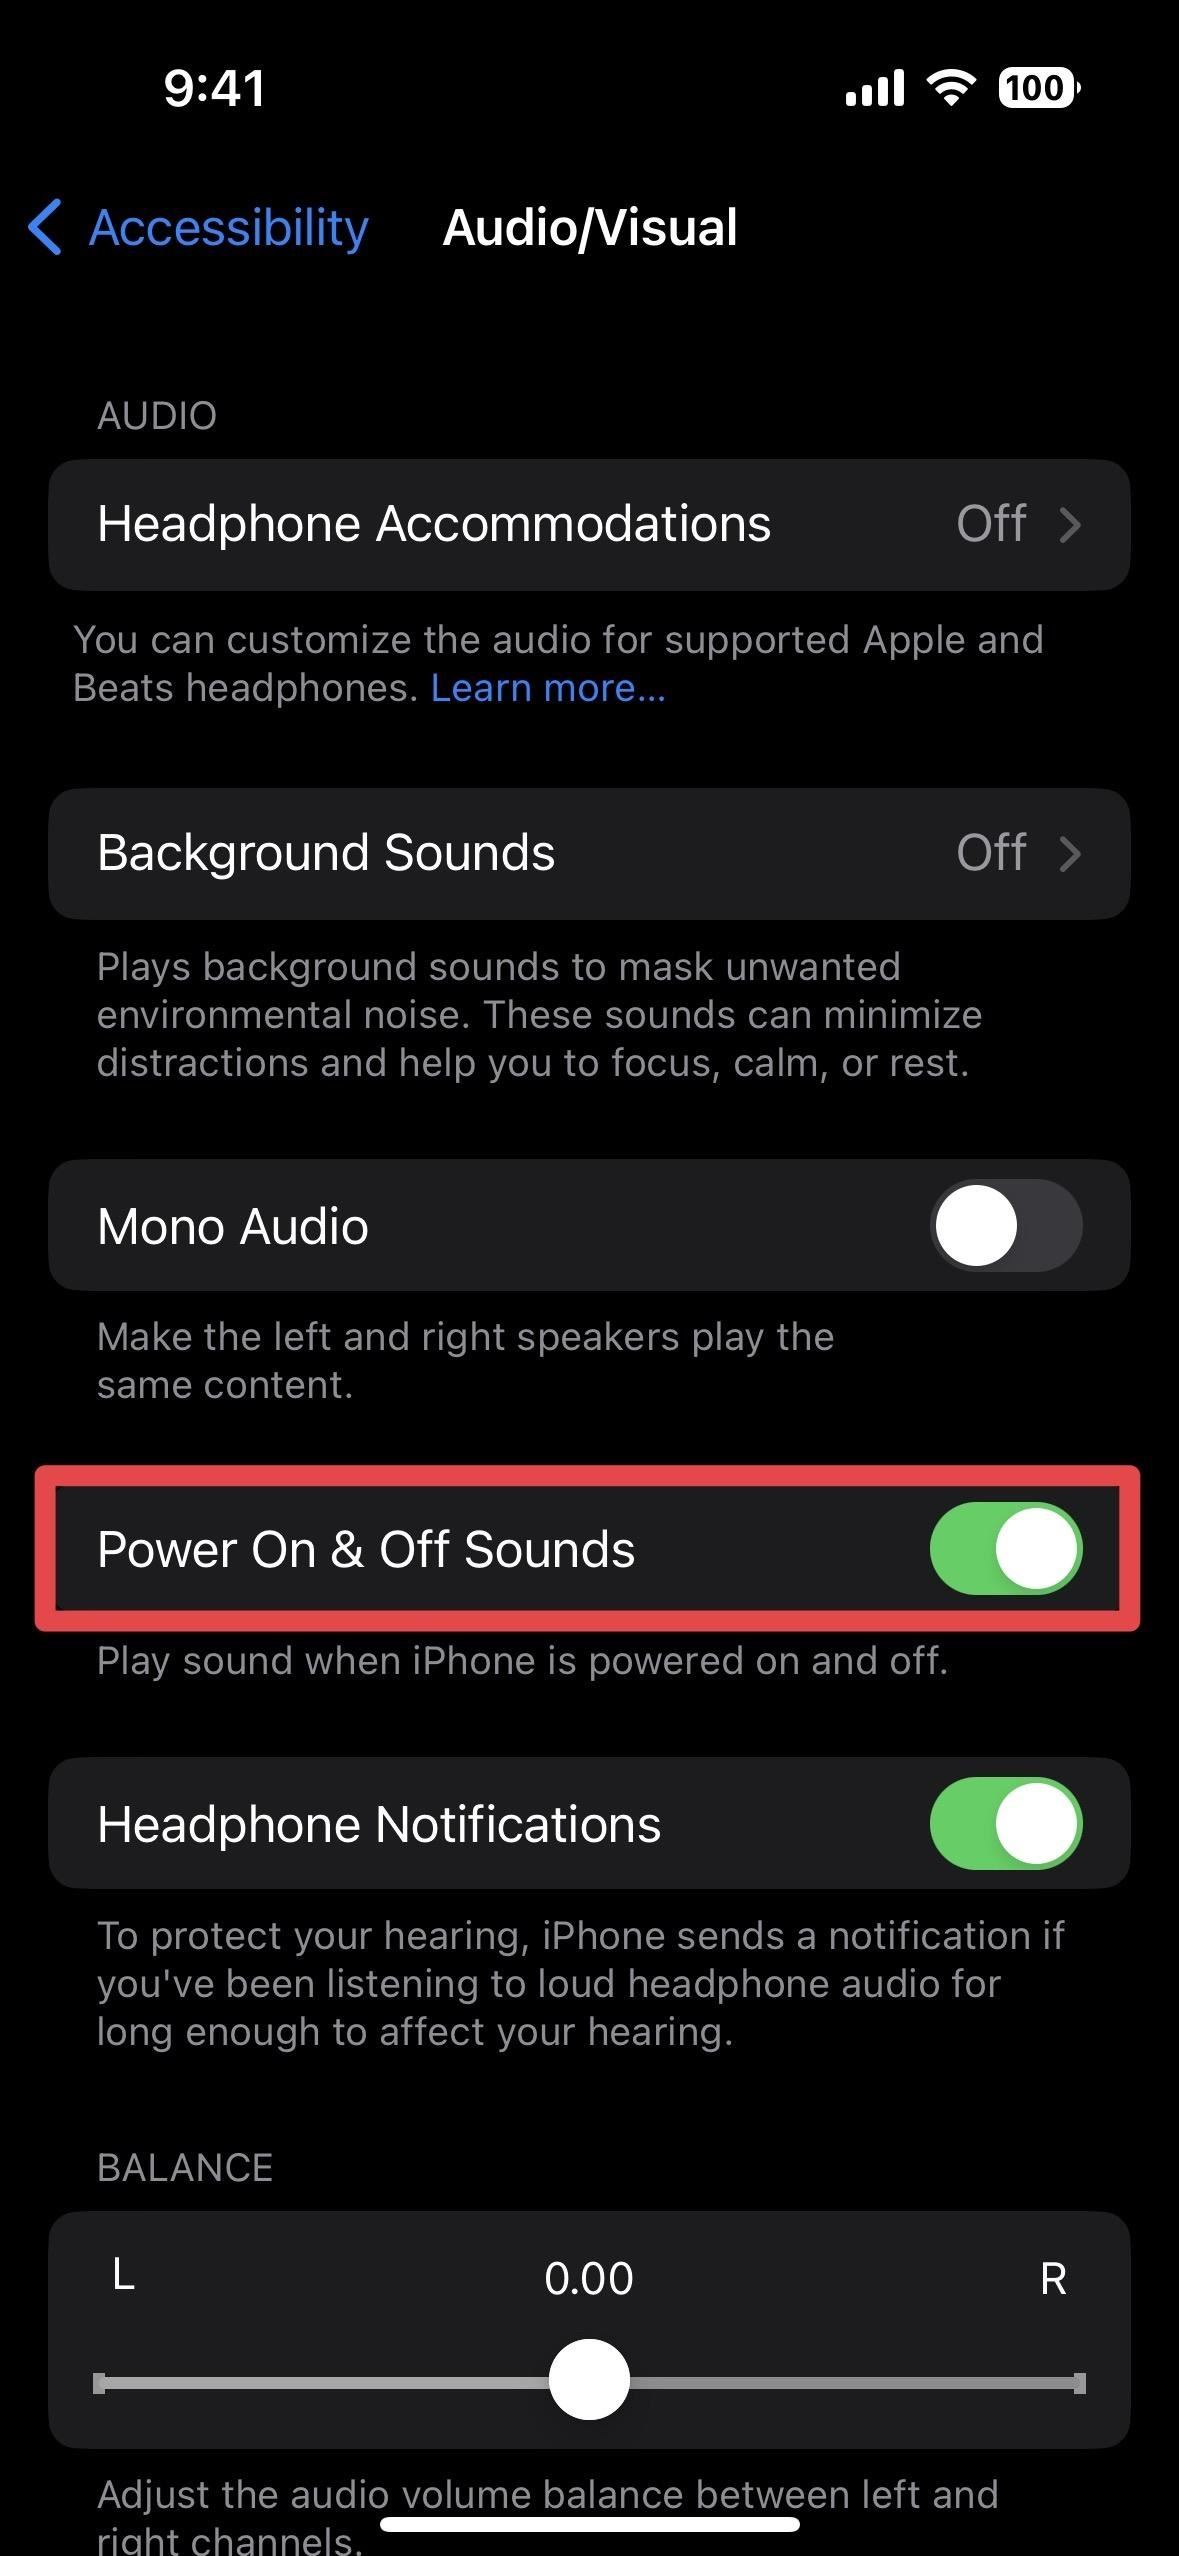 Unlock Your iPhone's Power Sounds to Hear Shutdown and Bootup Chimes Every Time You Turn Off and Restart Your Device